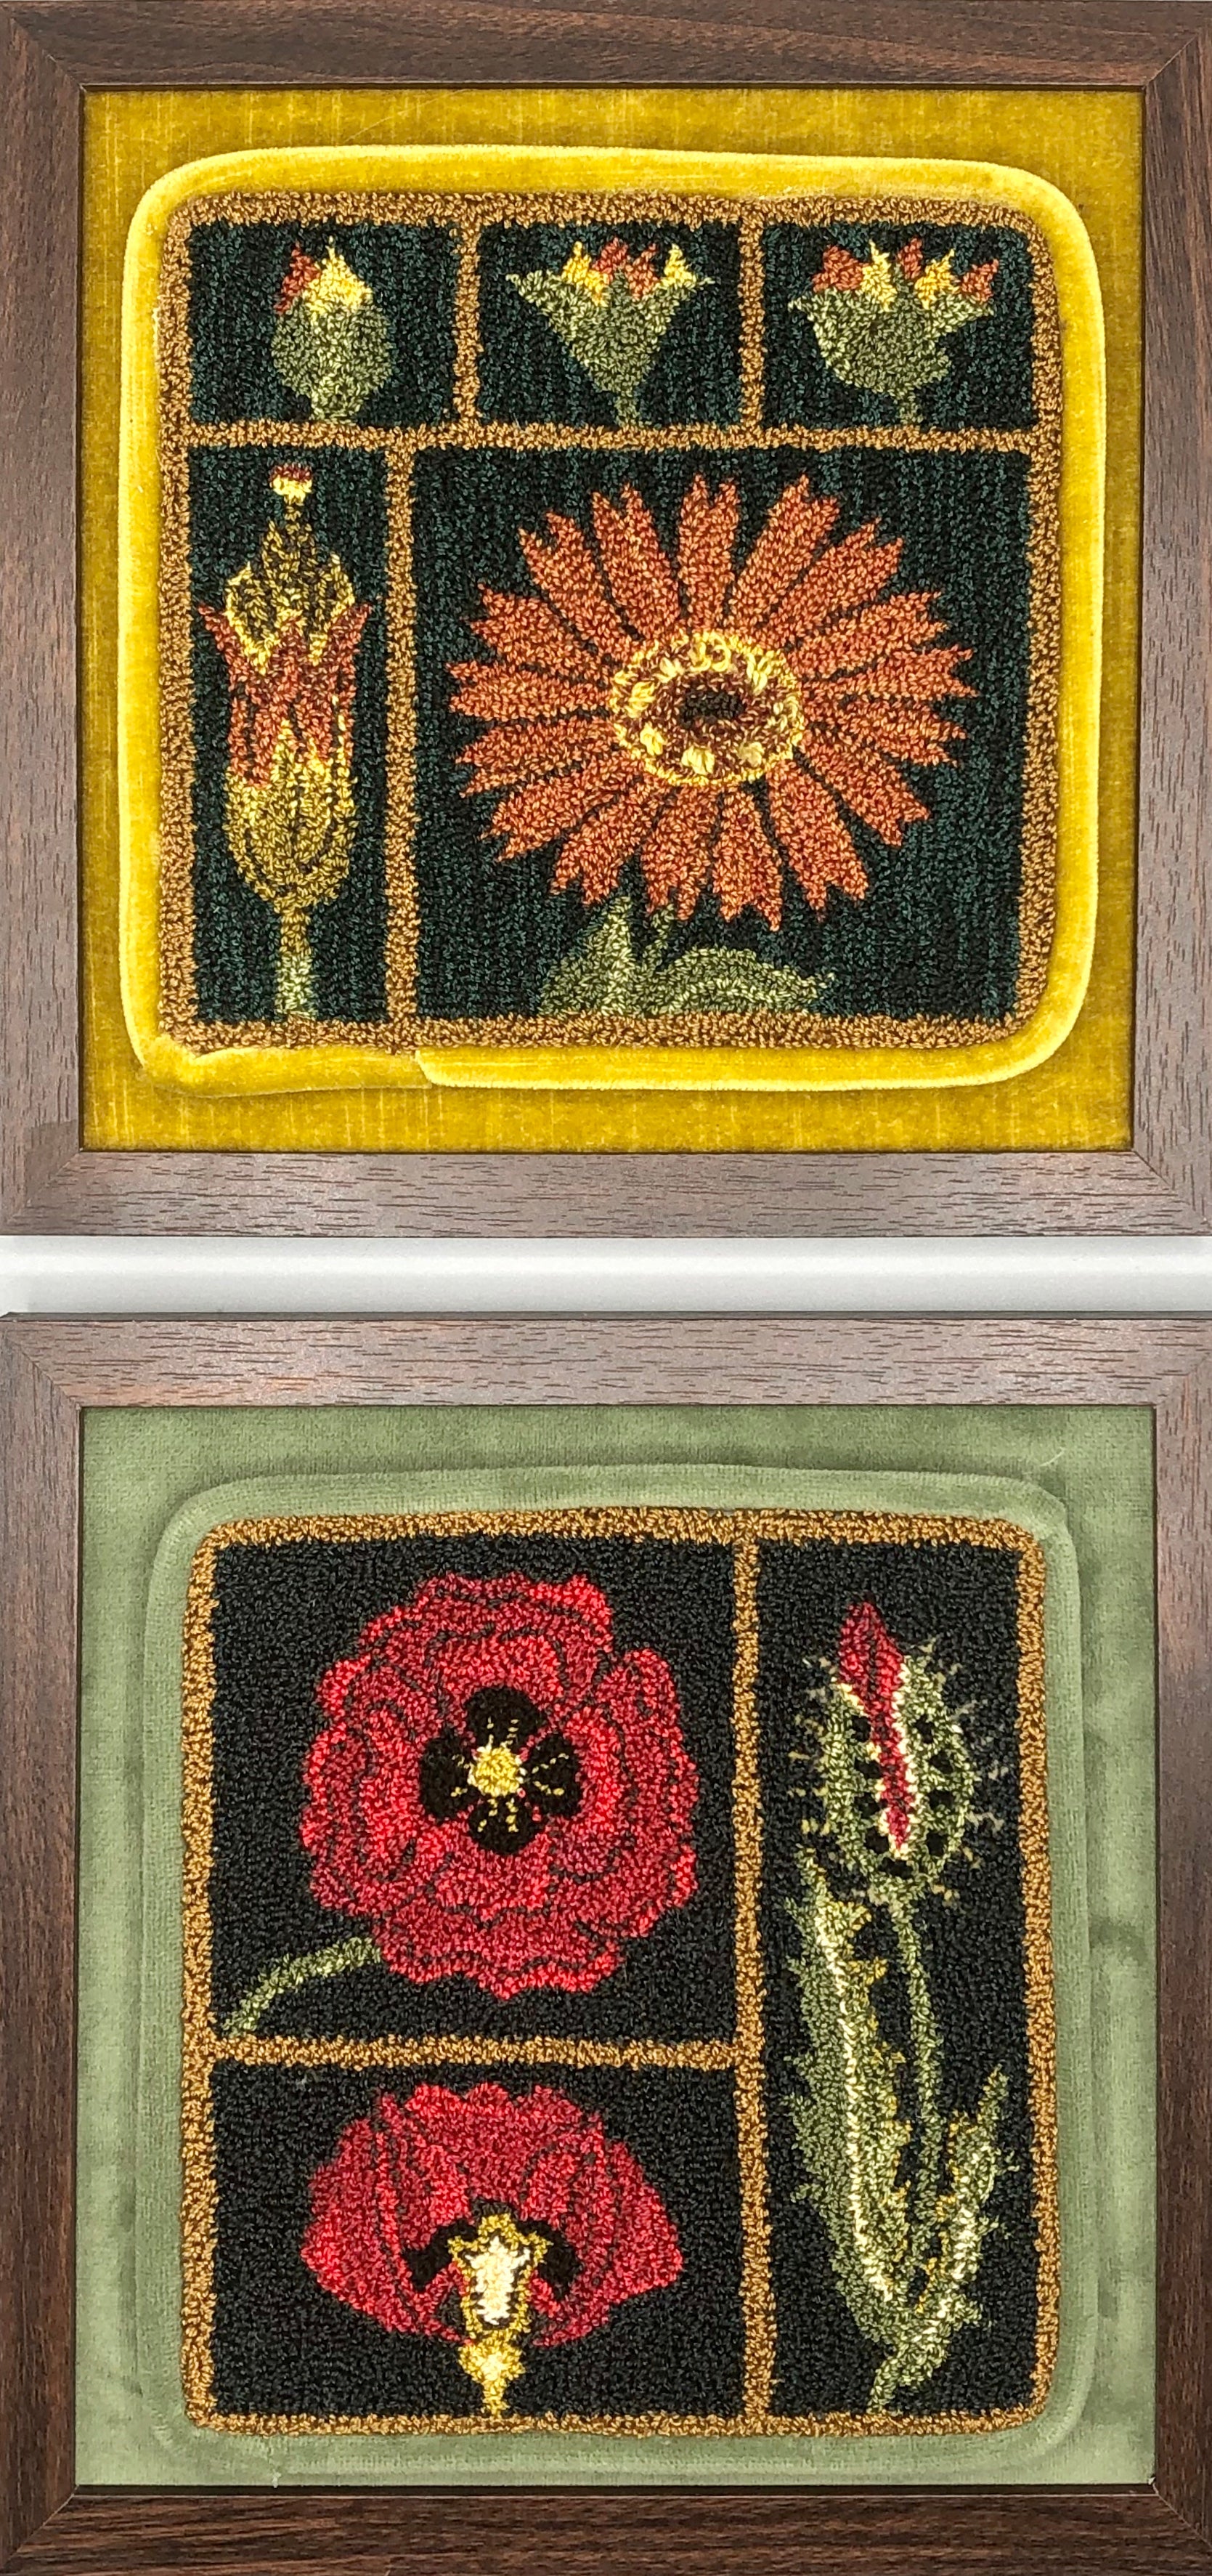 Marigold pattern is a rug hooking rug punch needle pattern, by Orphaned Wool that is hand-drawn on linen. This botanical pattern make a wonderful pillow or wall hanging design. This pattern also has a companion pattern Poppy that make a wonderful pattern set.